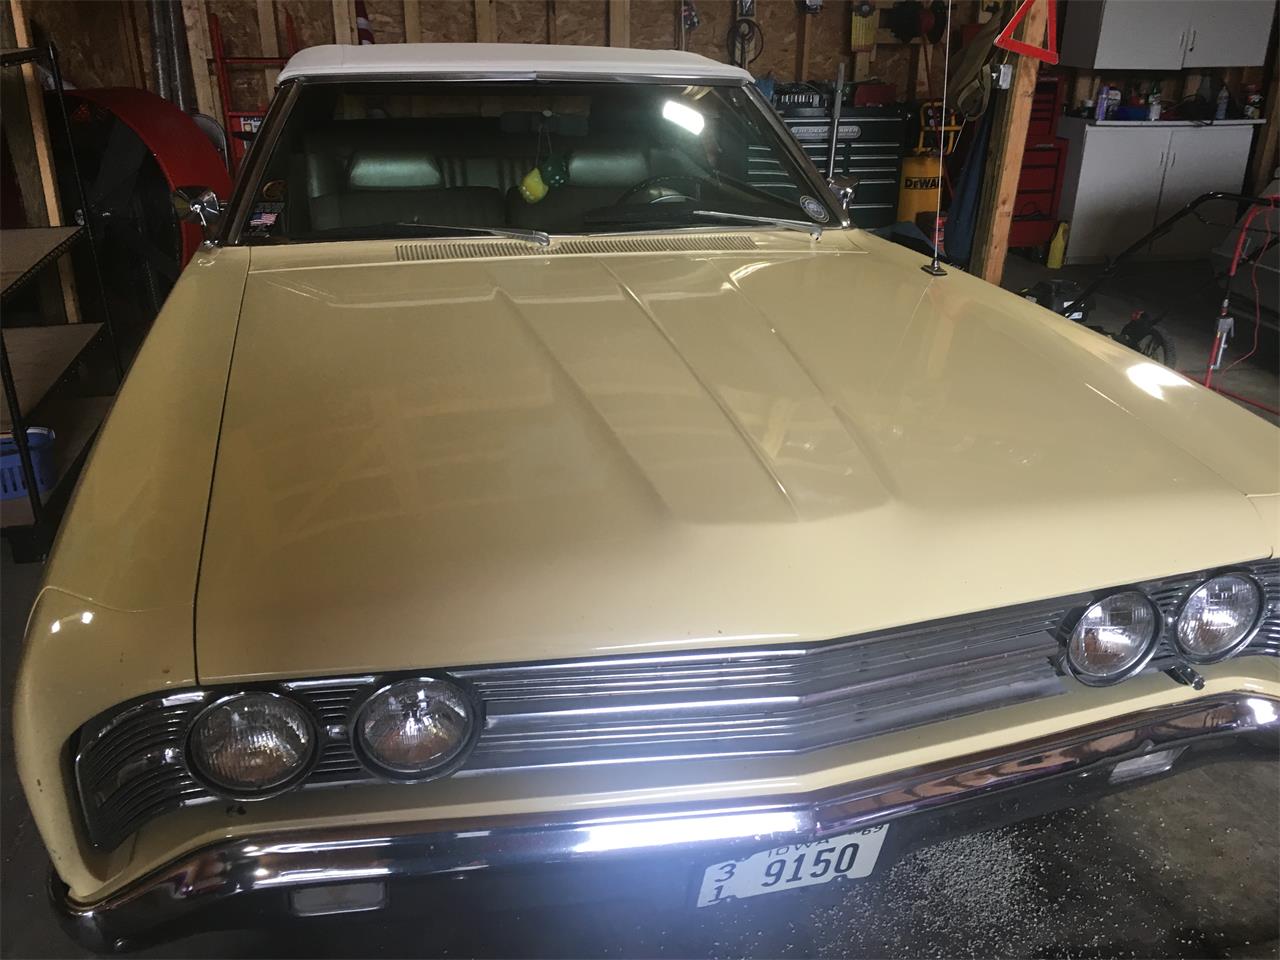 1969 Ford Galaxie 500 For Sale Classiccars Com Cc 1187933